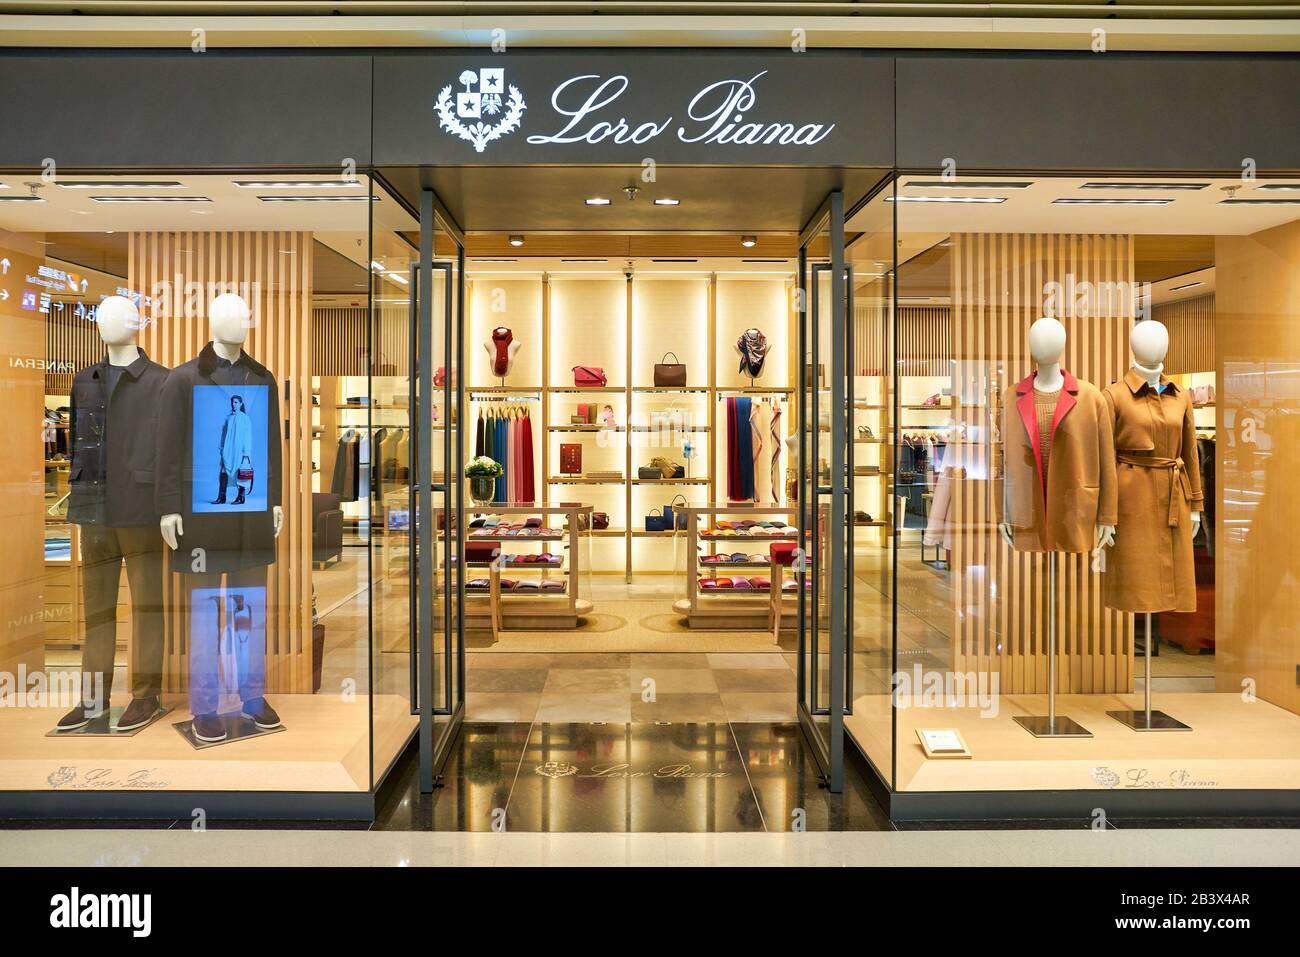 Loro Piana Store High Resolution Stock Photography and Images - Alamy